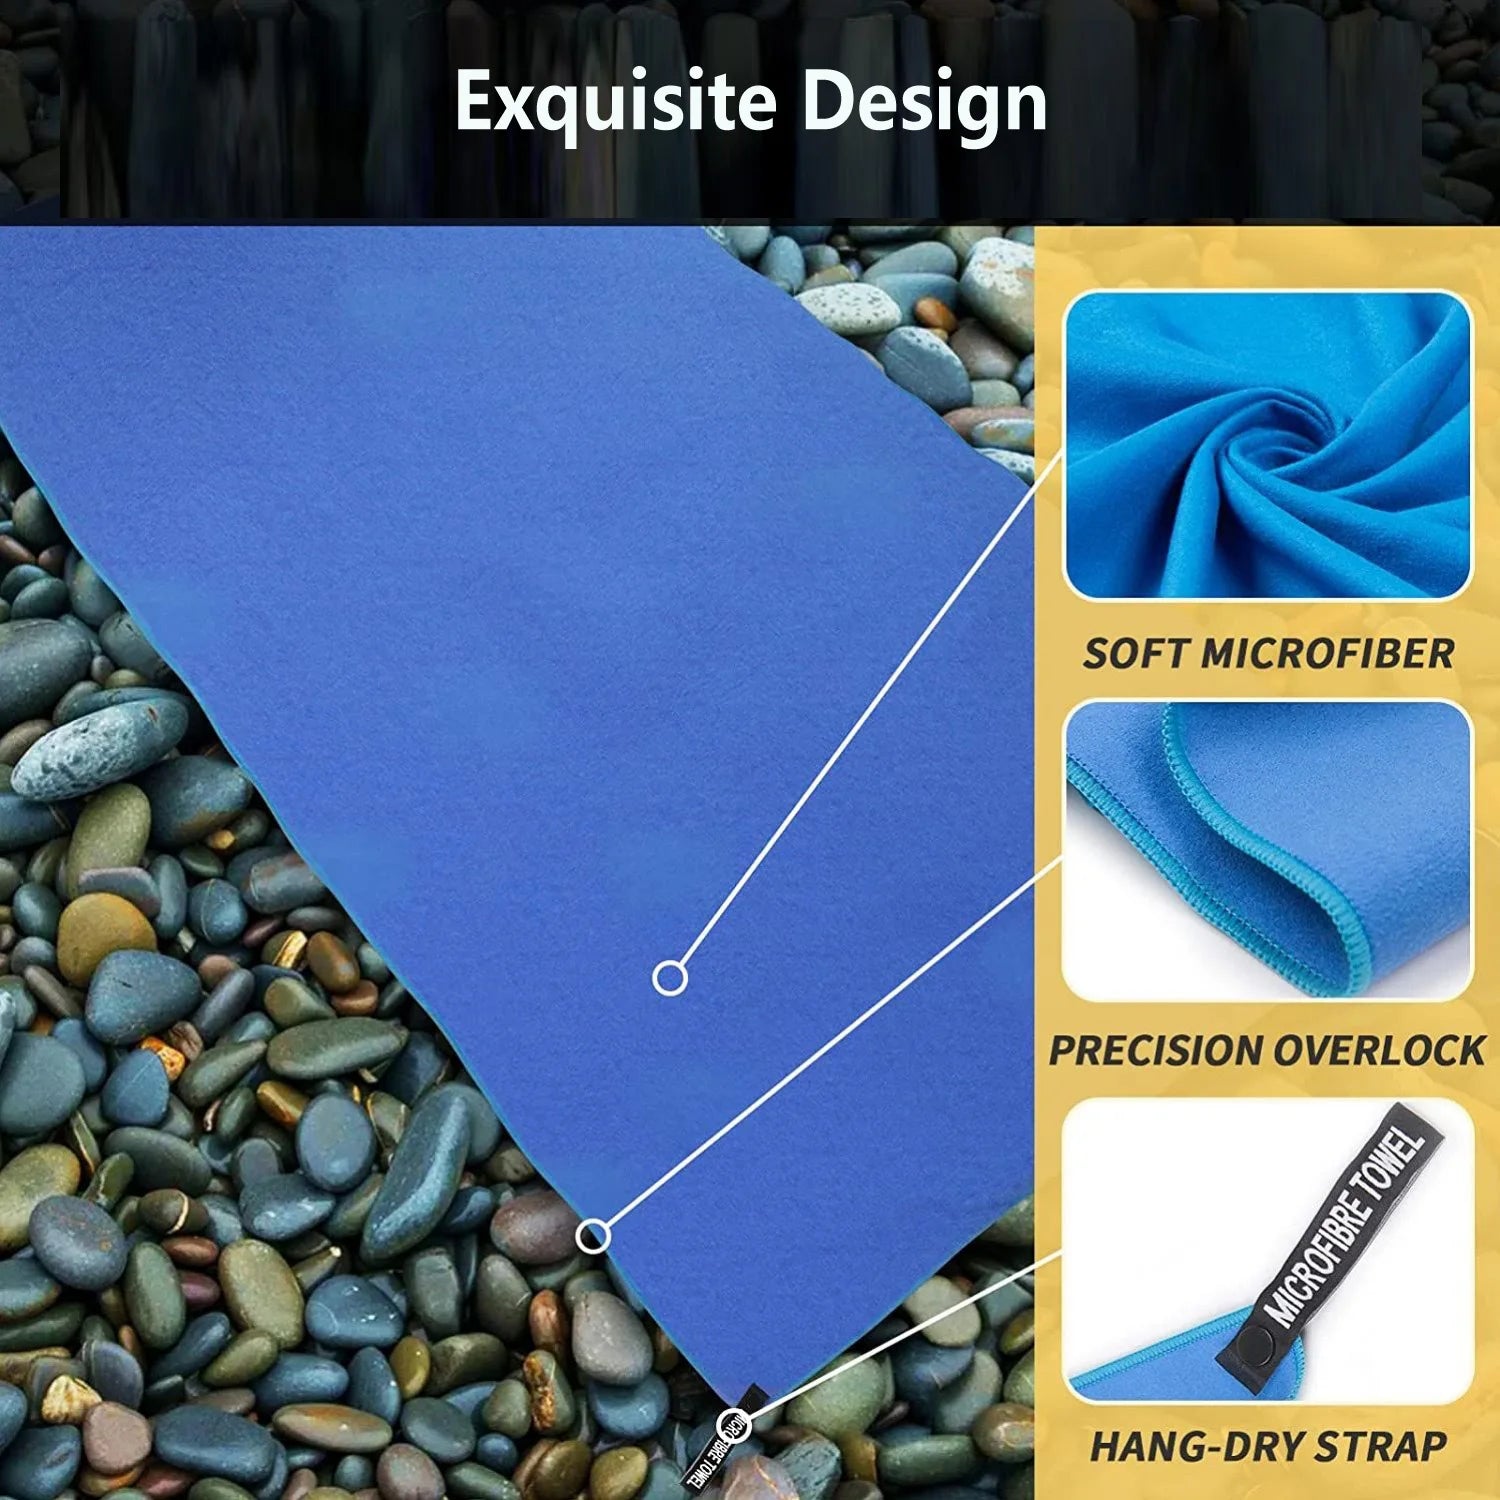  Quick Dry Microfiber Towel with an exquisite design